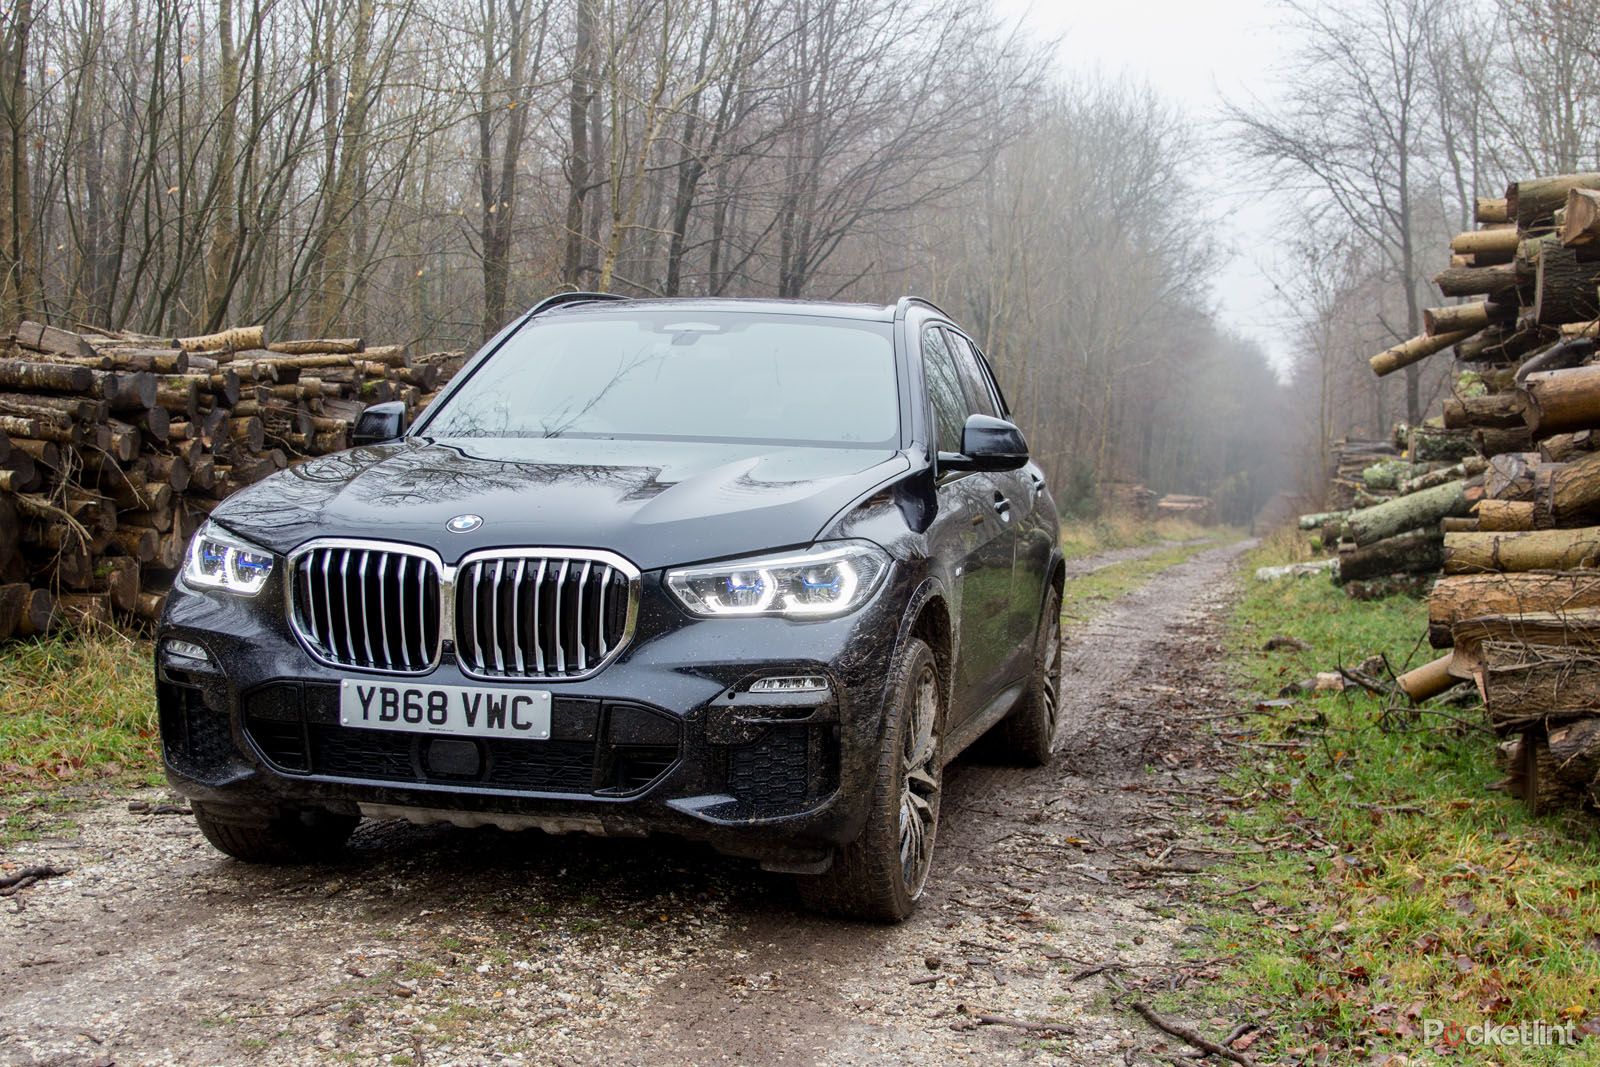 BMW X5 offroad image 1